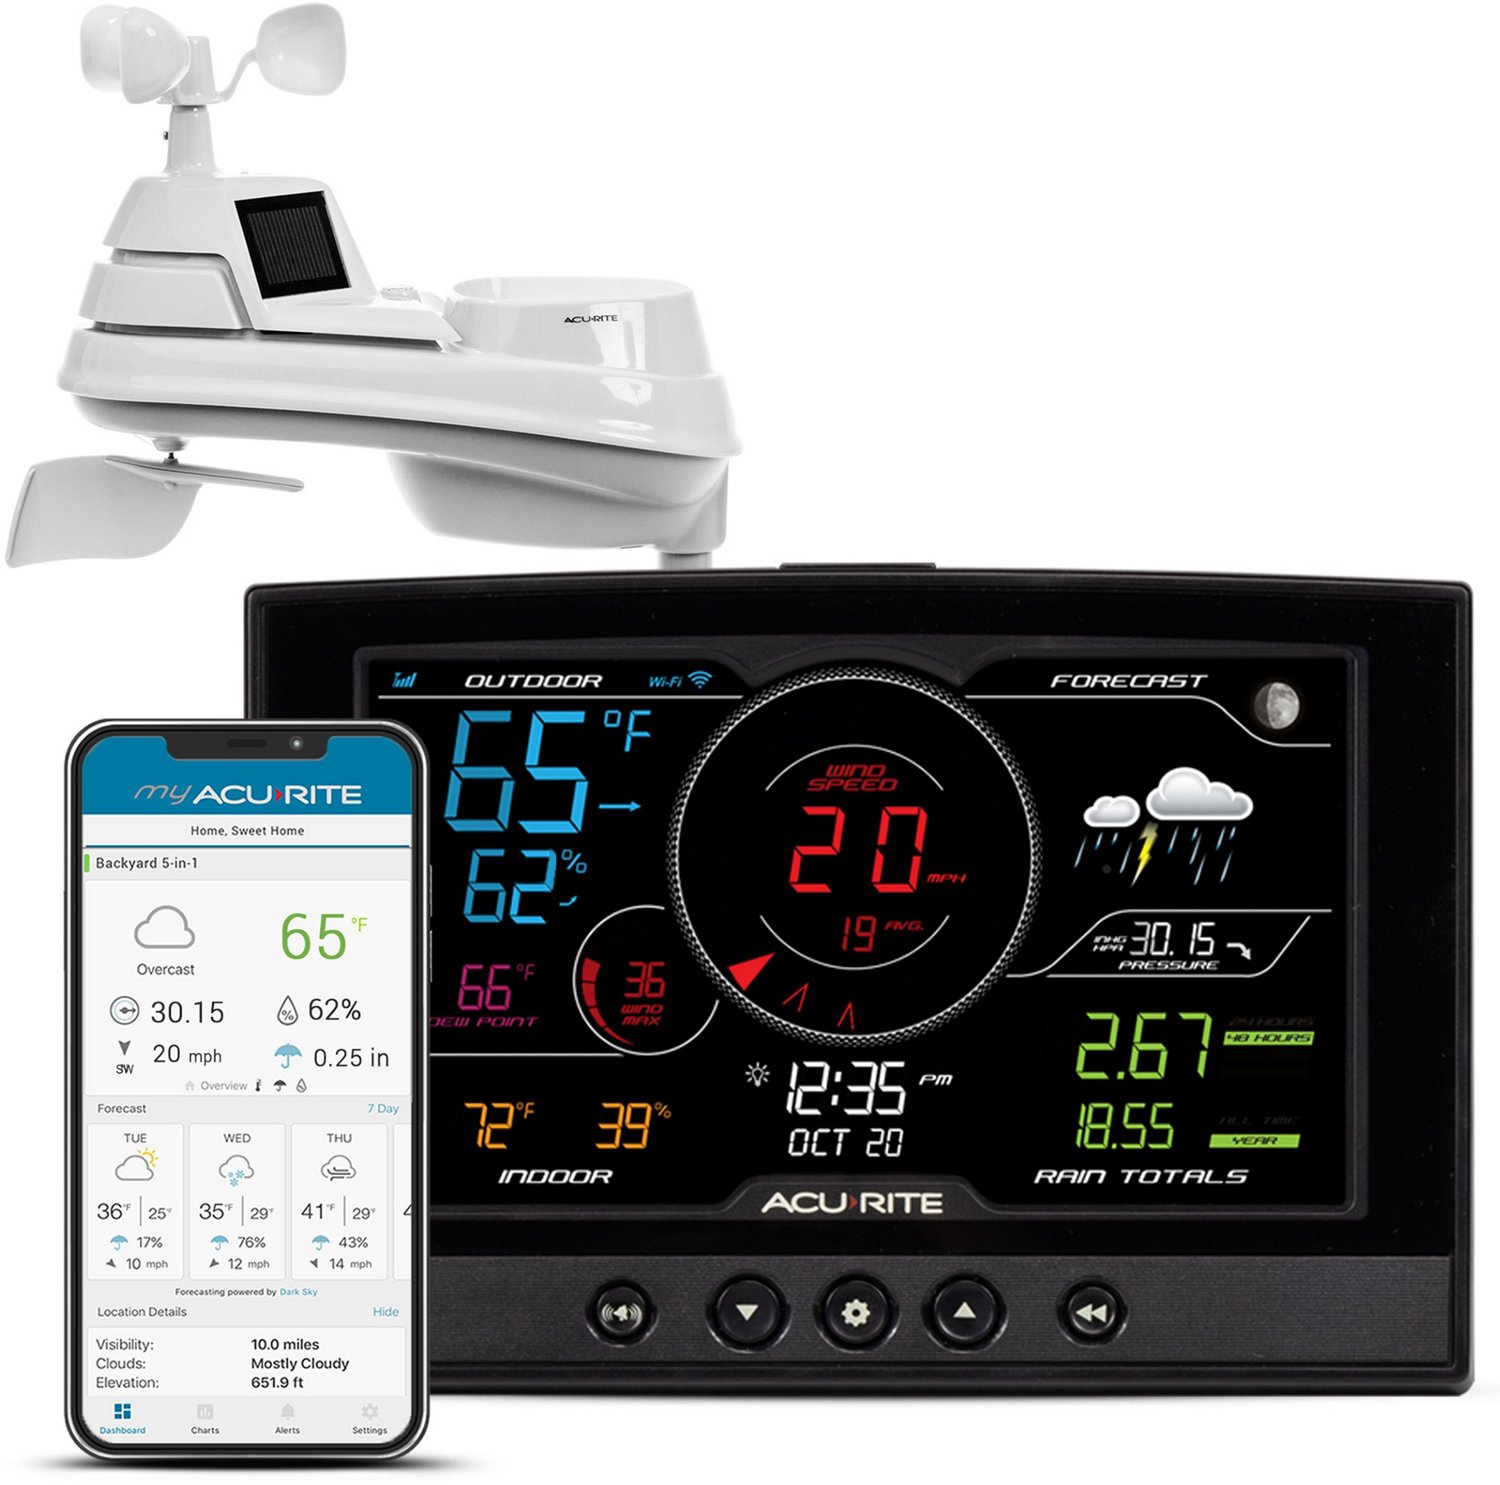 AcuRite Iris 5-in-1 Direct WiFi Display Weather Station                                                                          - view number 1 selected